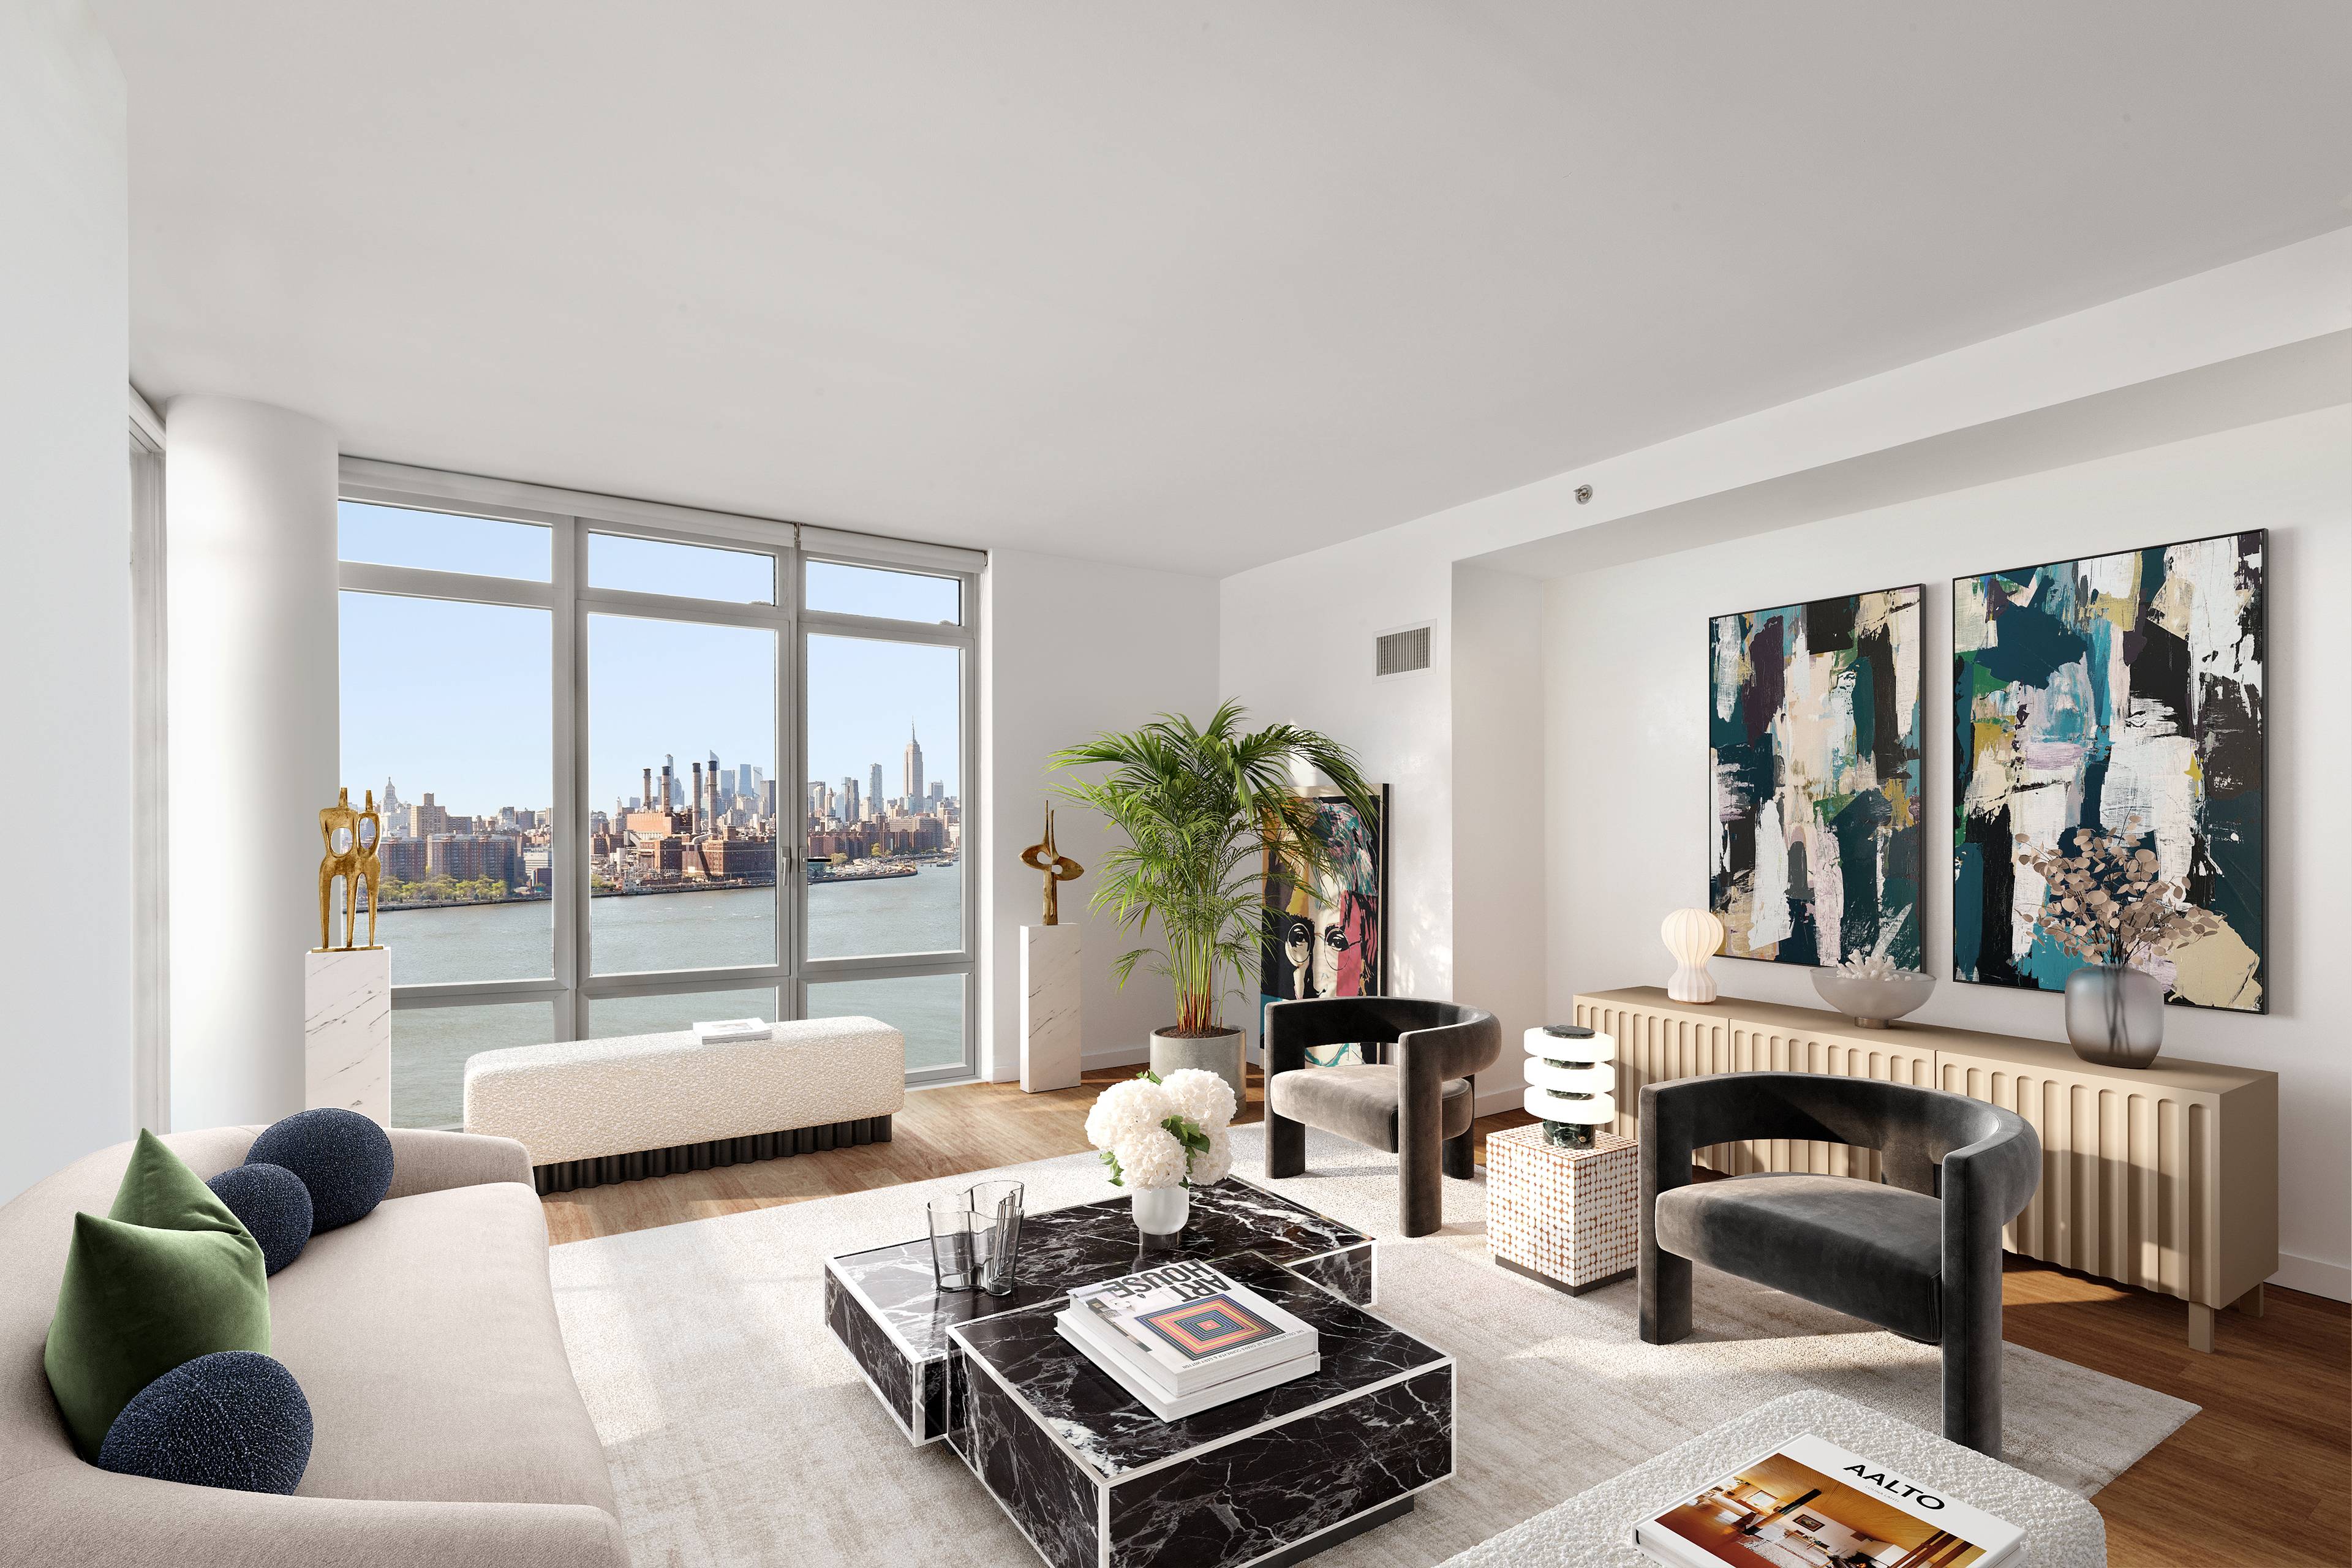 STUNNING 2 BEDS 2 BATHS + HOME OFFICE  WITH ICONIC MANHATTAN AND RIVER VIEW - WILLIAMSBURG WATERFRONT